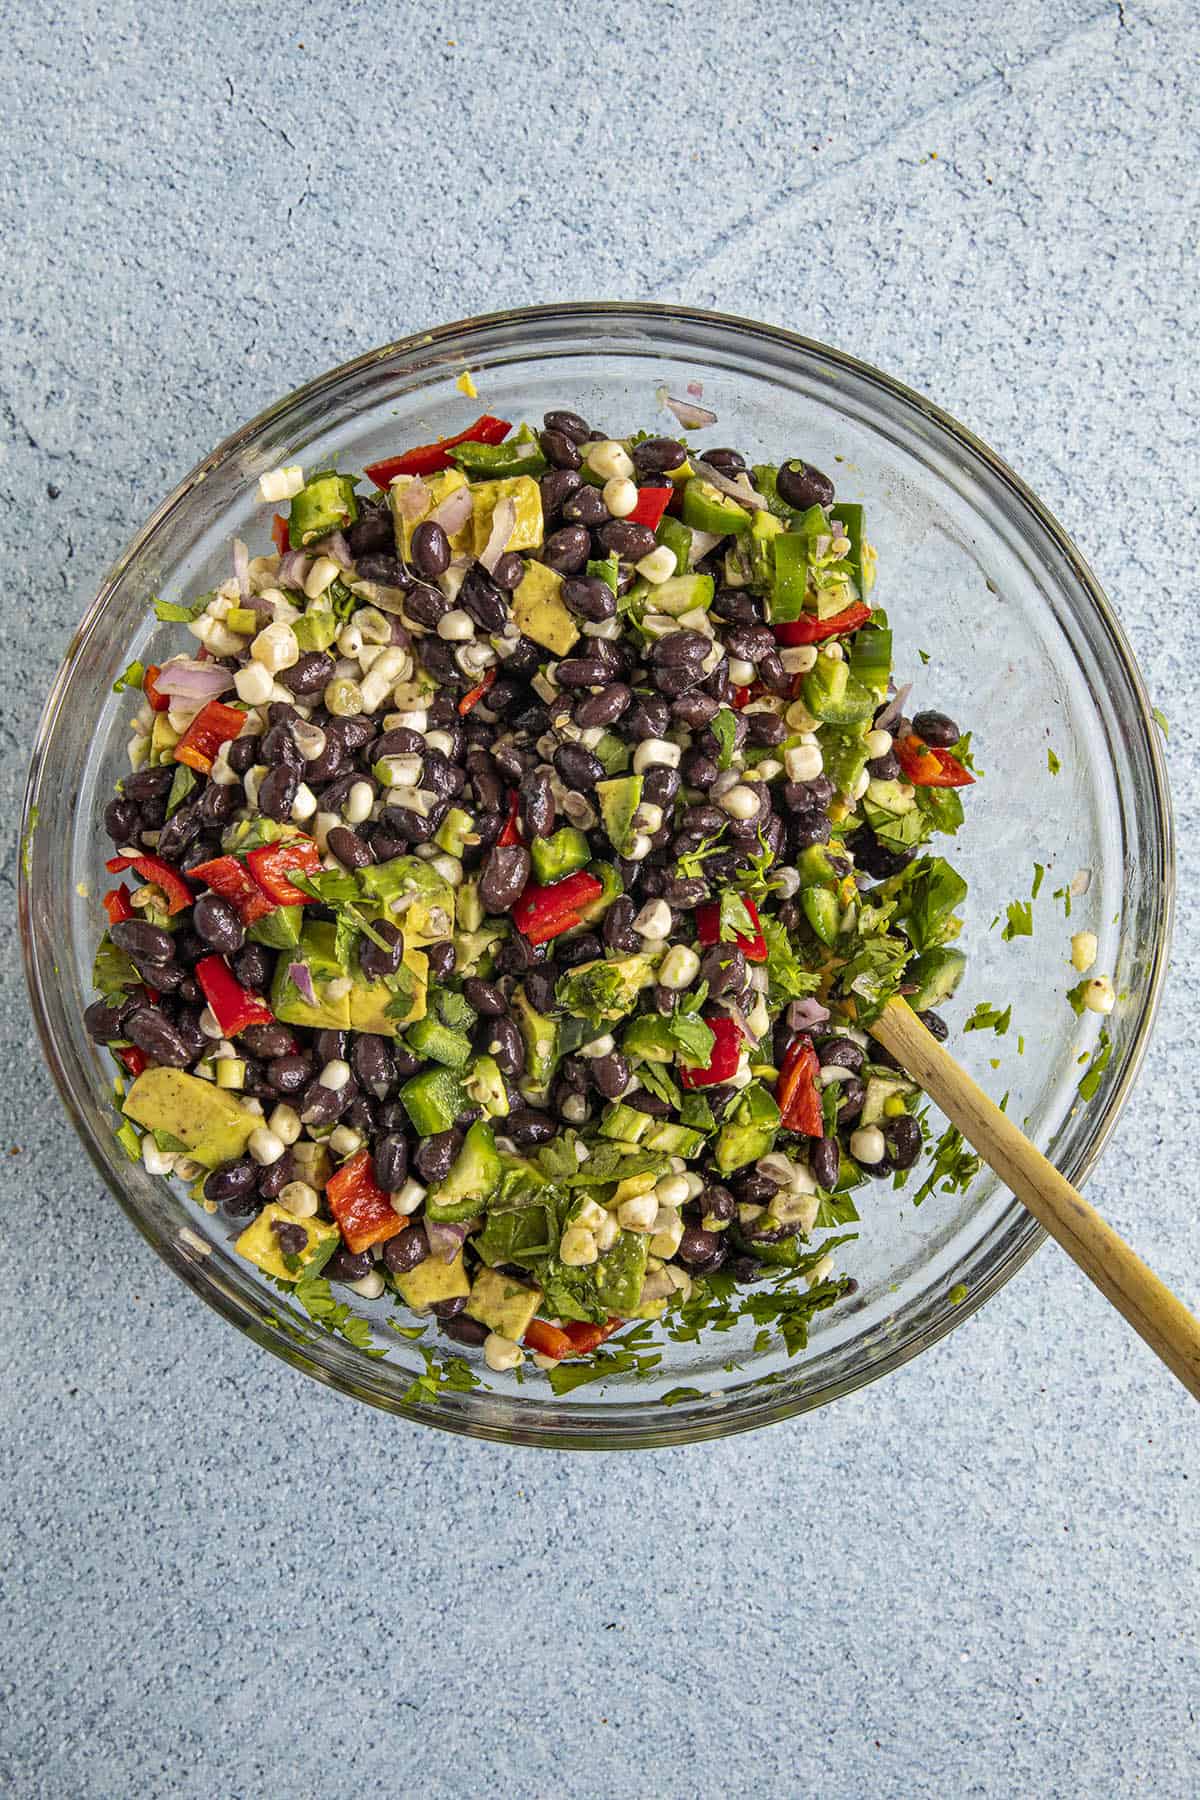 Mixing the main Black Bean Salad ingredients together